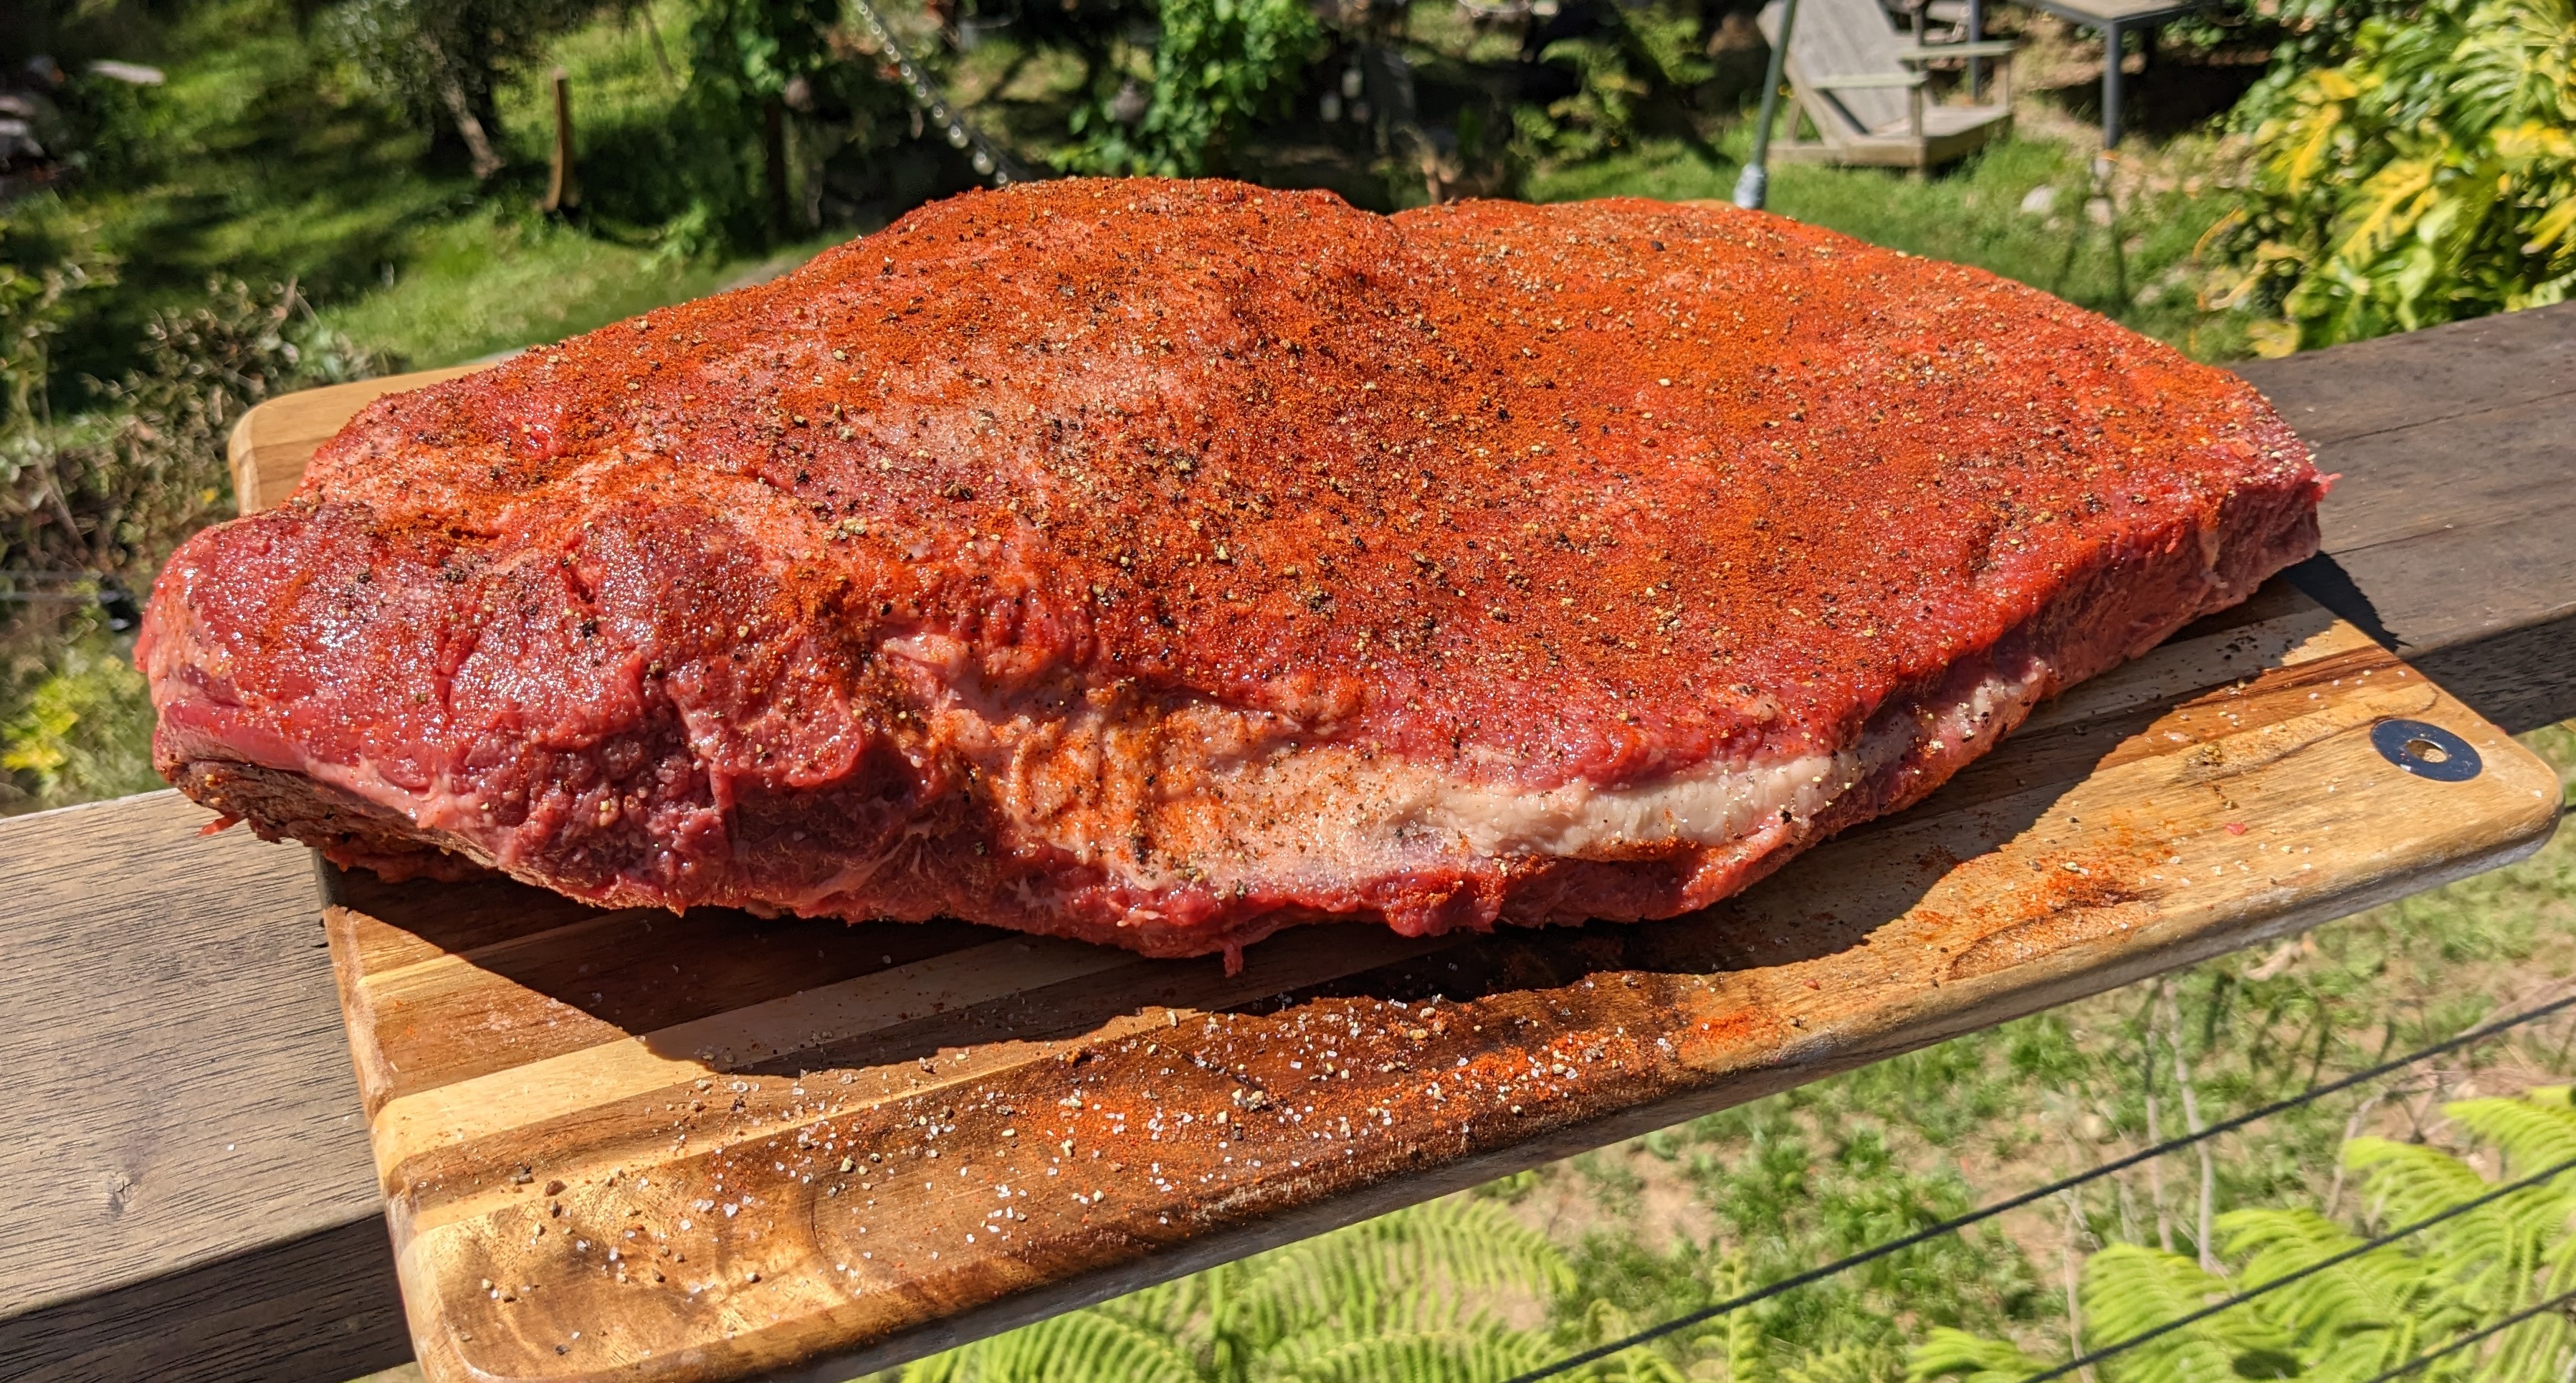 6 kilos of brisket, trimmed, rubbed, and ready for smoking.